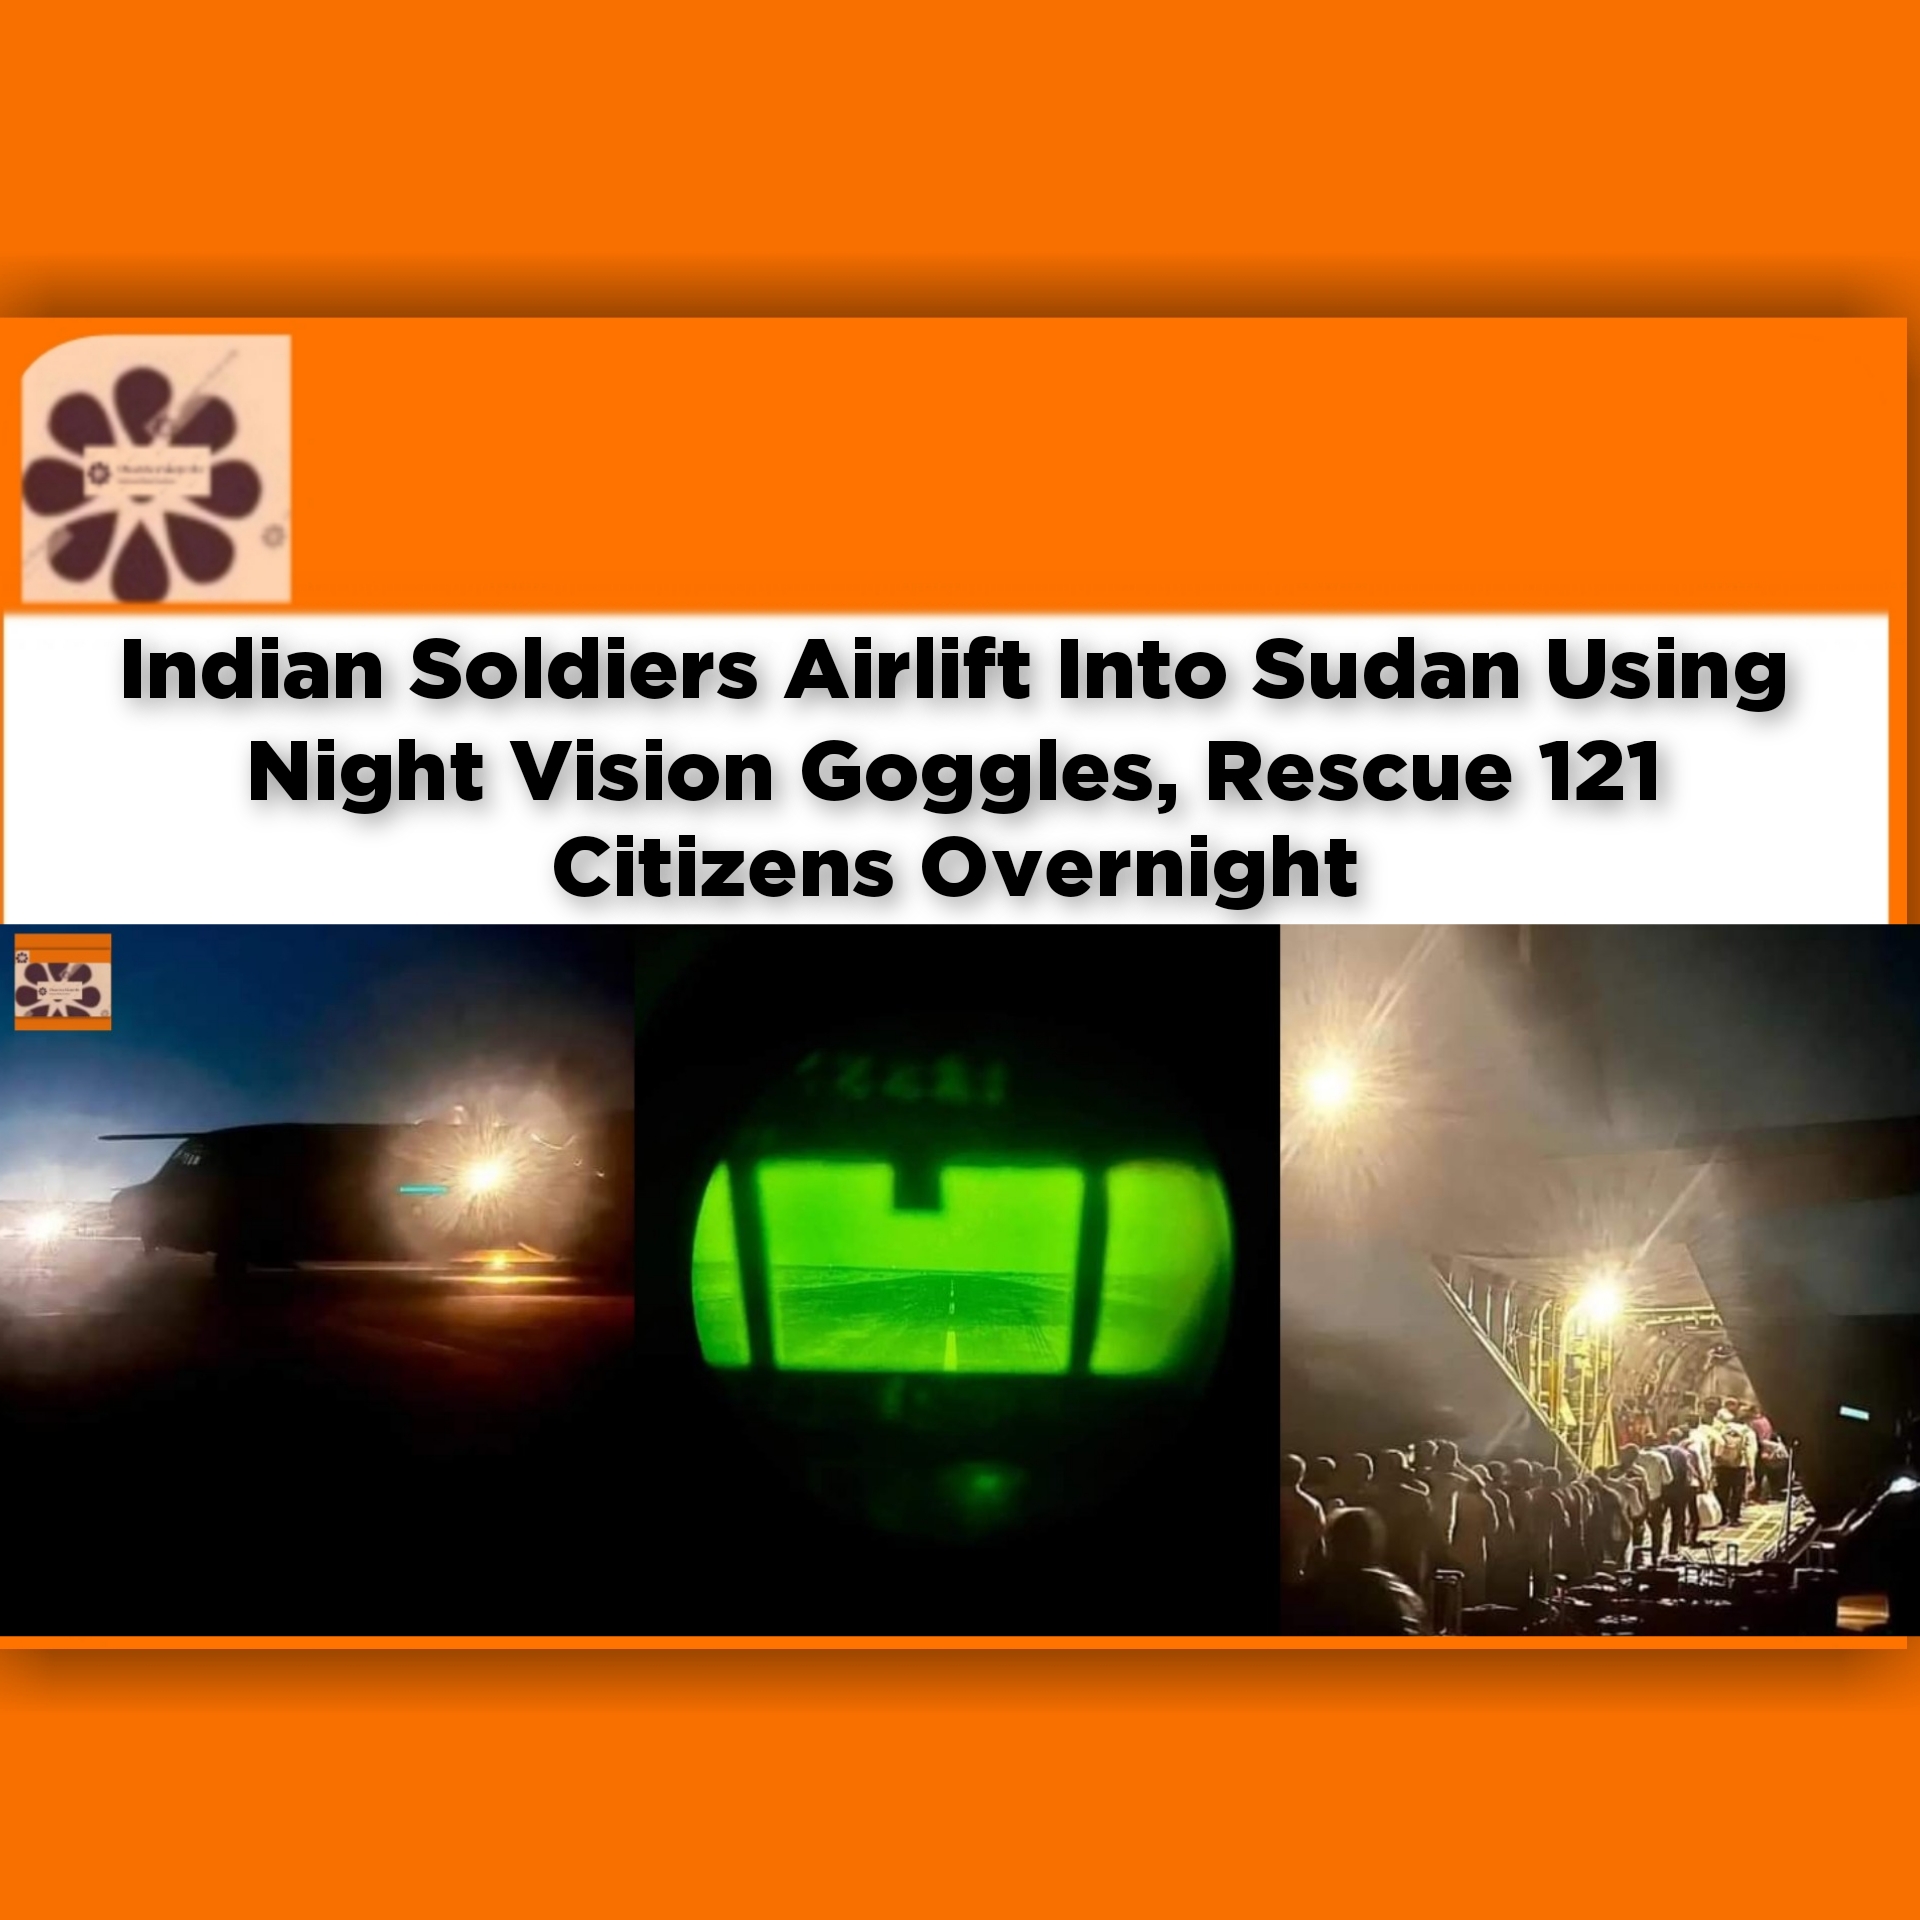 Indian Soldiers Airlift Into Sudan Using Night Vision Goggles, Rescue 121 Citizens Overnight ~ OsazuwaAkonedo #airlift #breaking #citizens #goggles, #India #Khartoum #military #OsazuwaAkonedo #overnight #Plane #security #soldiers #Sudan #war